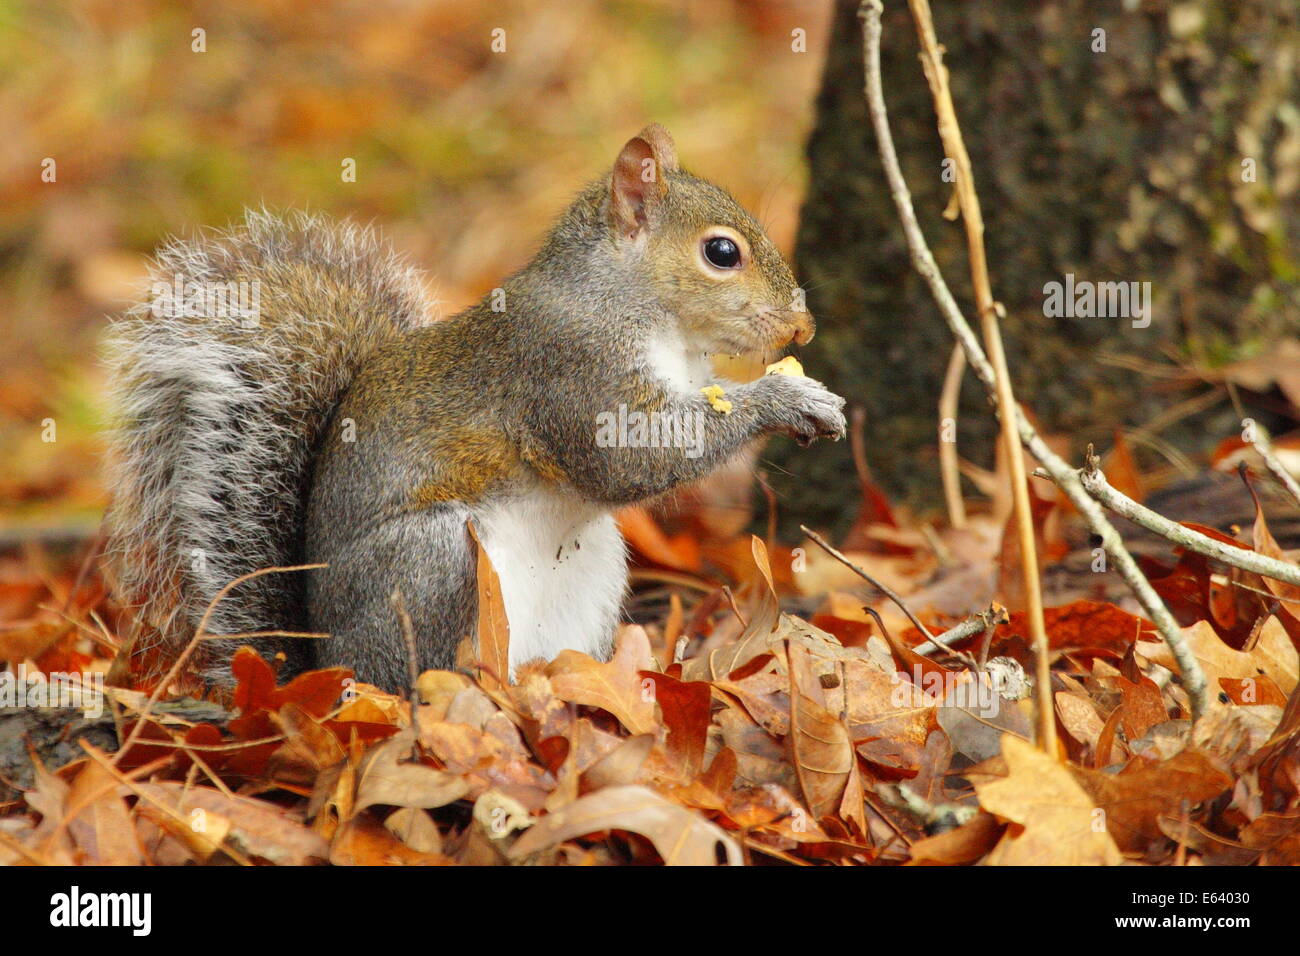 An Eastern Grey Squirrel eats among autumn leaves in the Great Smoky Mountains National Park, Tennessee, USA Stock Photo